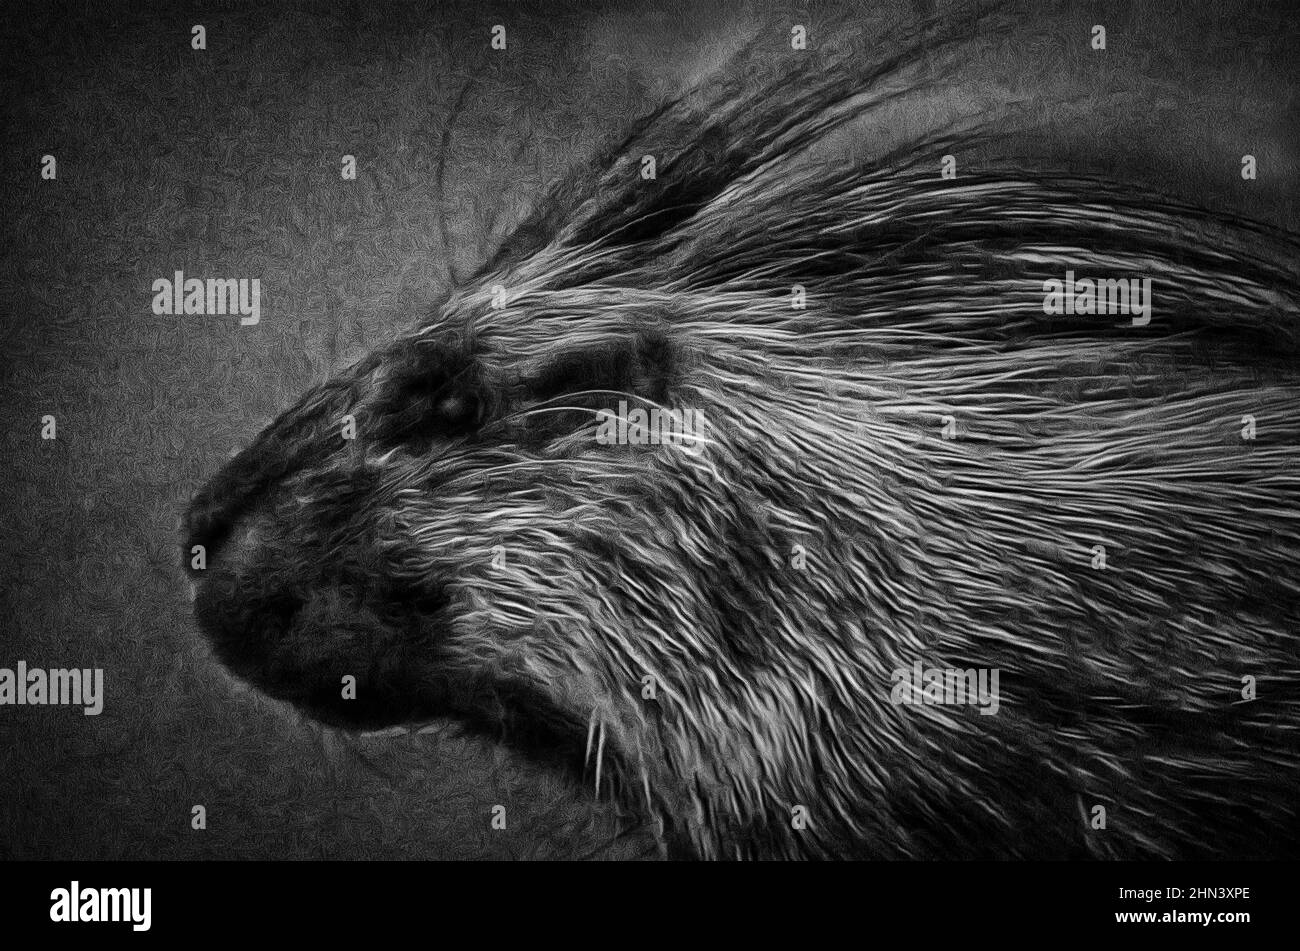 Indian porcupine (lat. Hystrix indica) - Old World porcupine family pet (Hystricidae), Illustrations Stock Photo